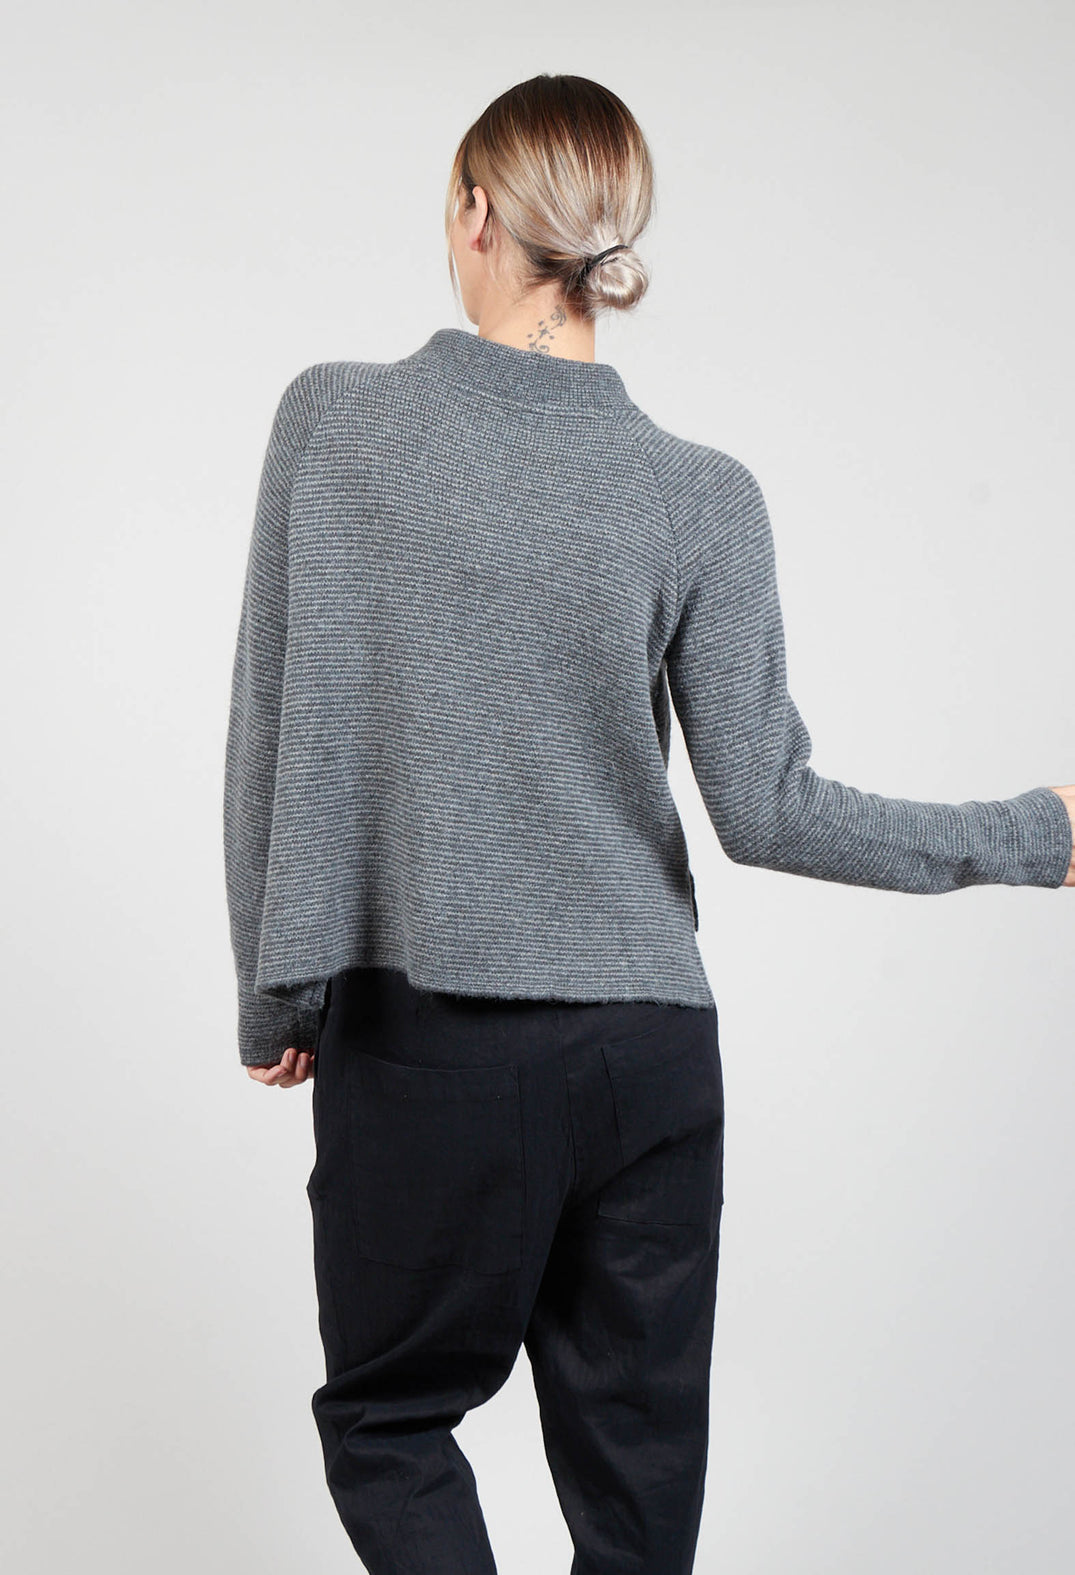 Knit Jumper with Cut Out Collar in Stripe